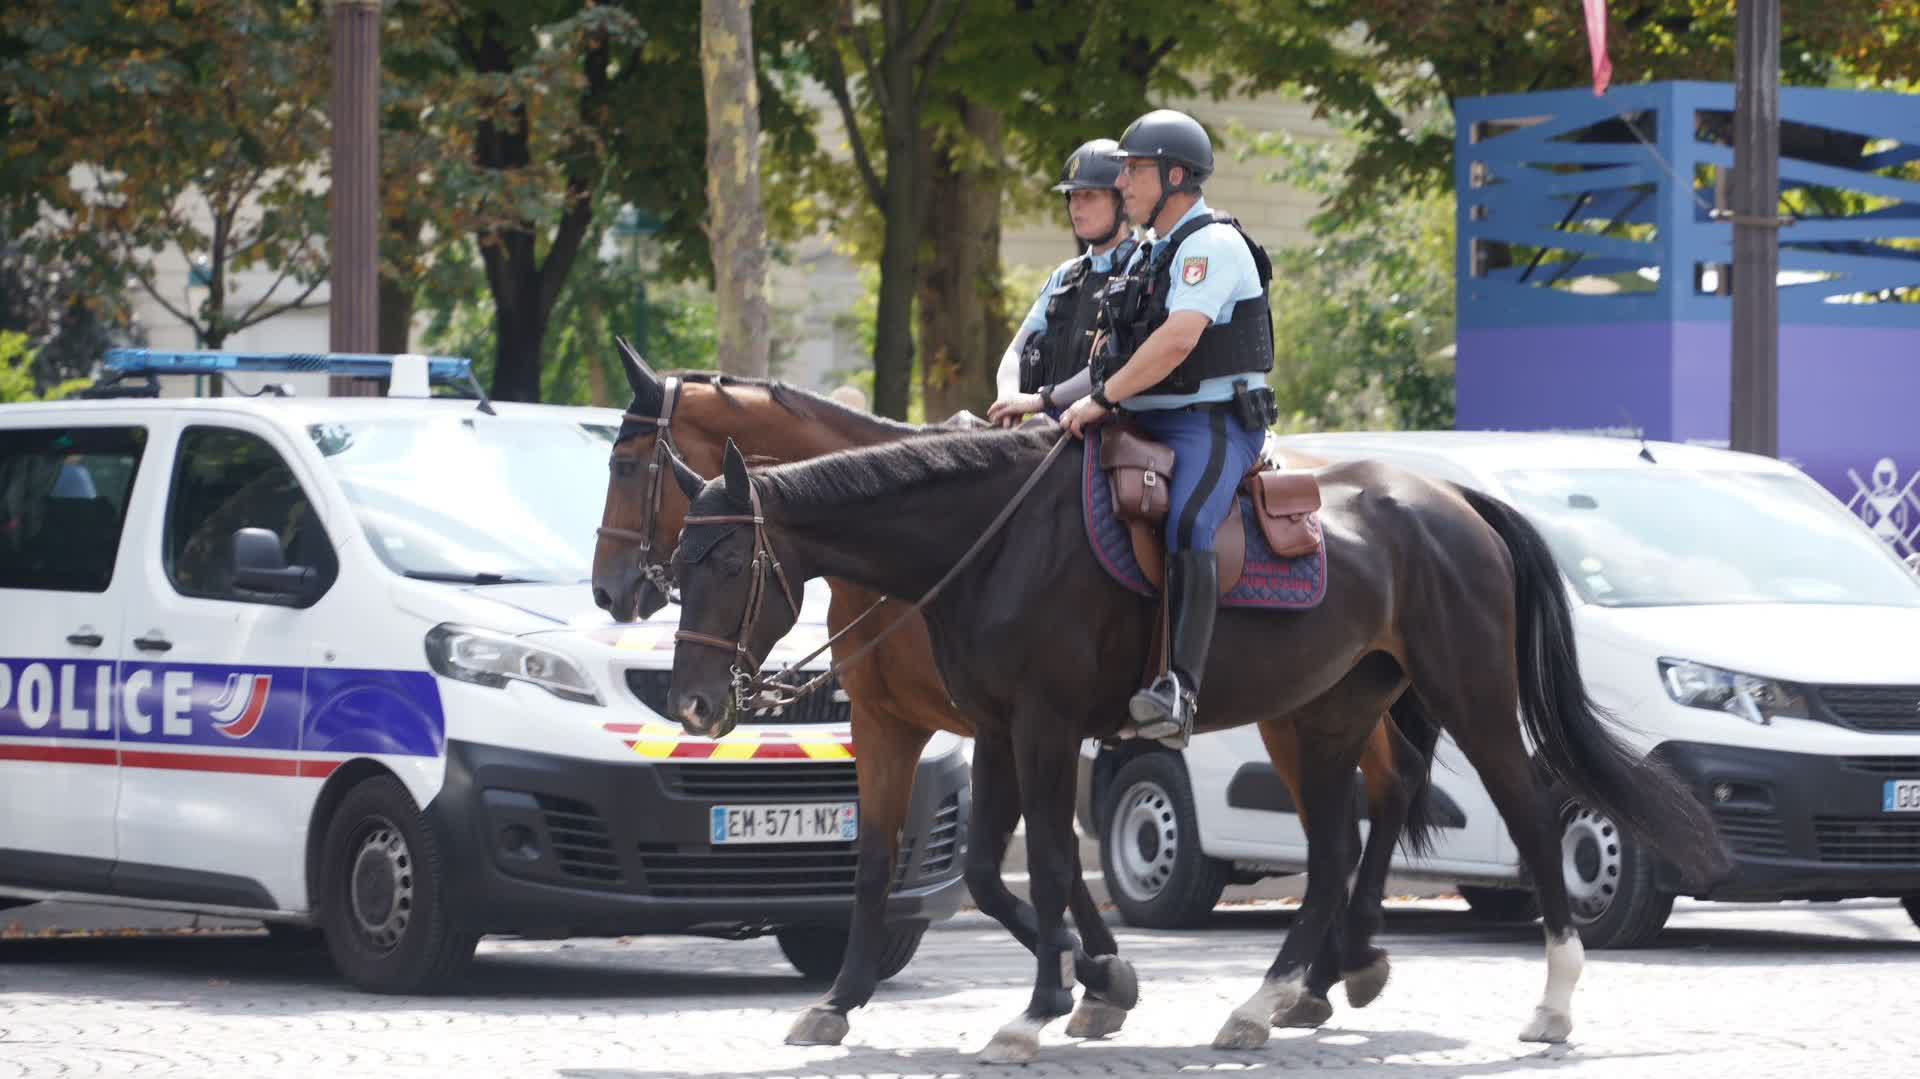 Photos | Police presence increased as Pairs Olympic Games approach